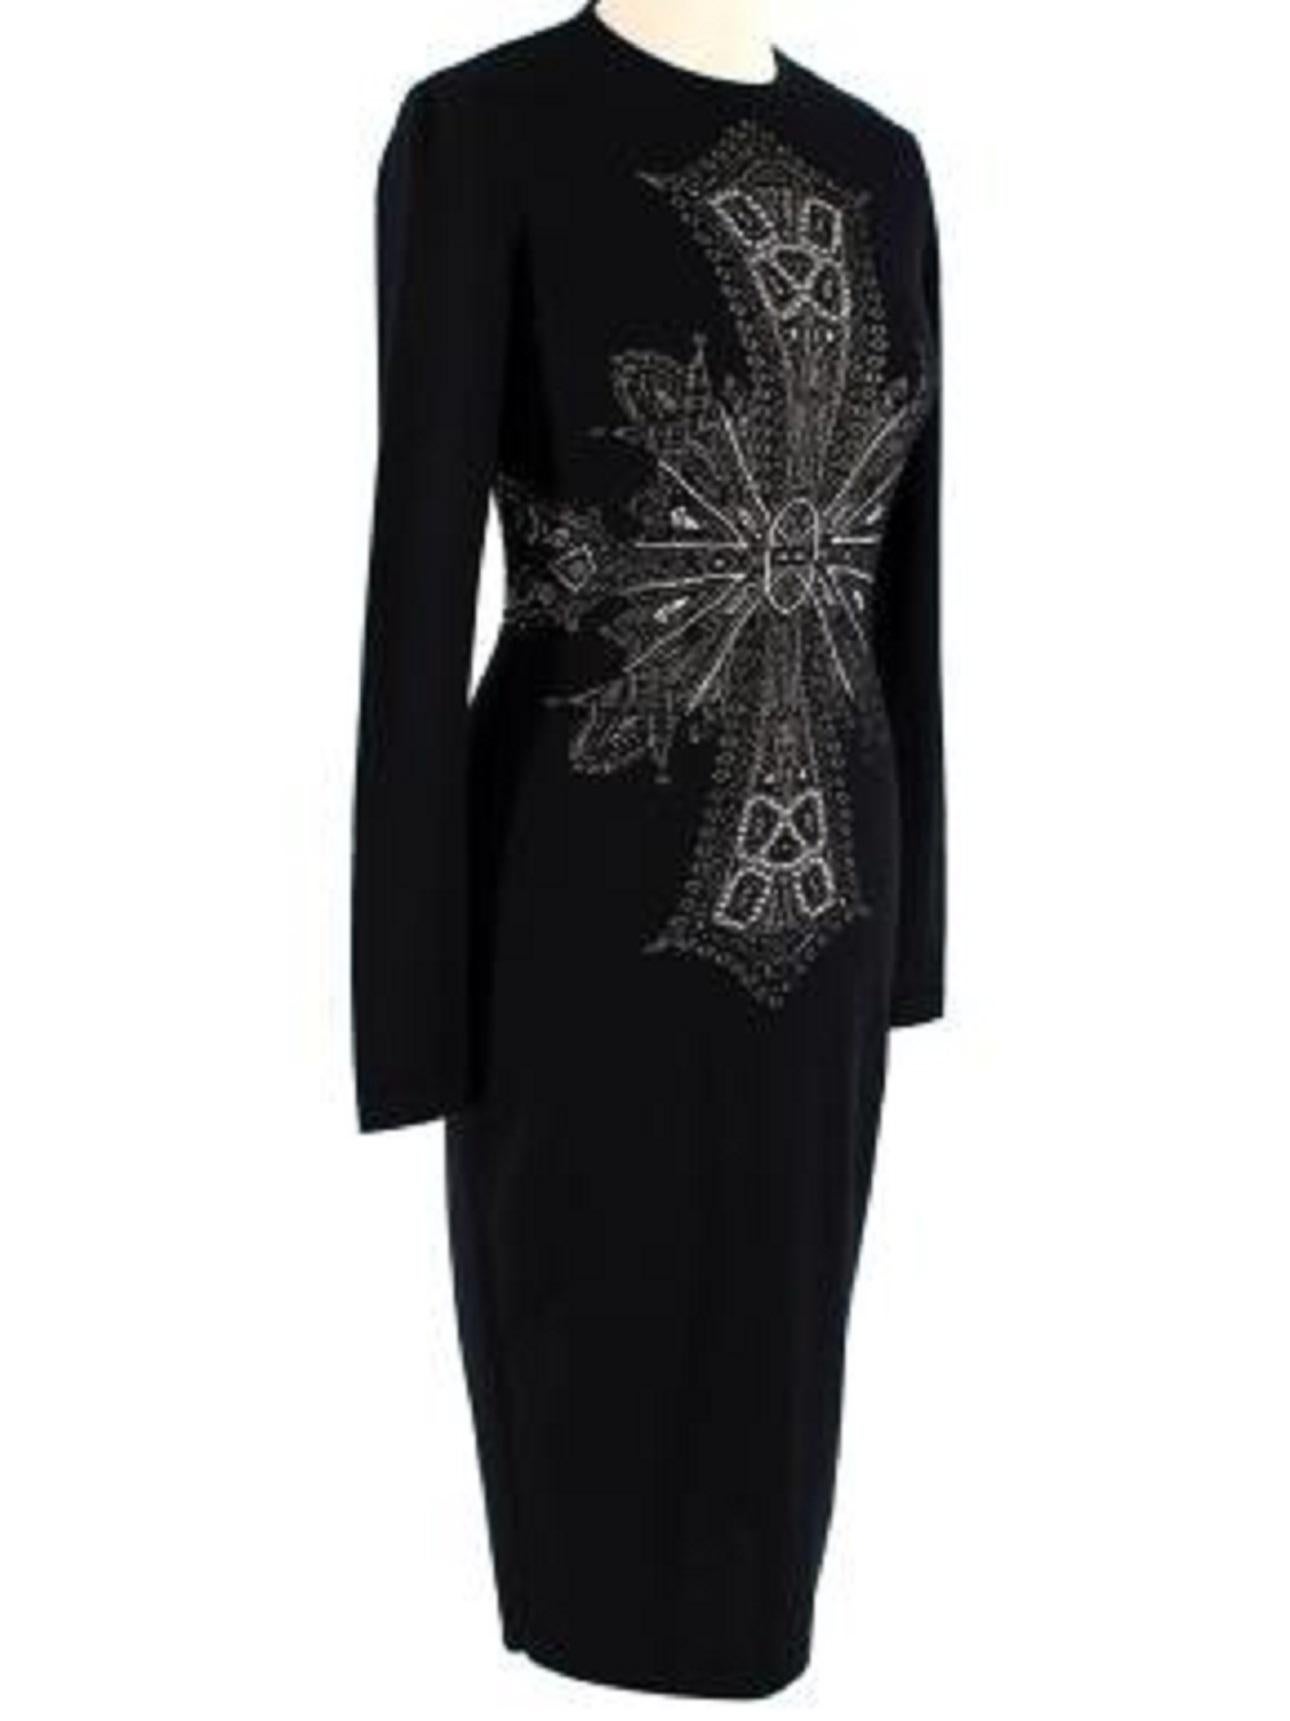 Alexander McQueen Black Fitted Knitted Dress
- Made of soft wool
- Intarsia cross detail
- fitted to the body
- Long sleeves. 

Made in Italy.
Dry clean in a laundry bag.
Condition 10/10.

PLEASE NOTE, THESE ITEMS ARE PRE-OWNED AND MAY SHOW SIGNS OF